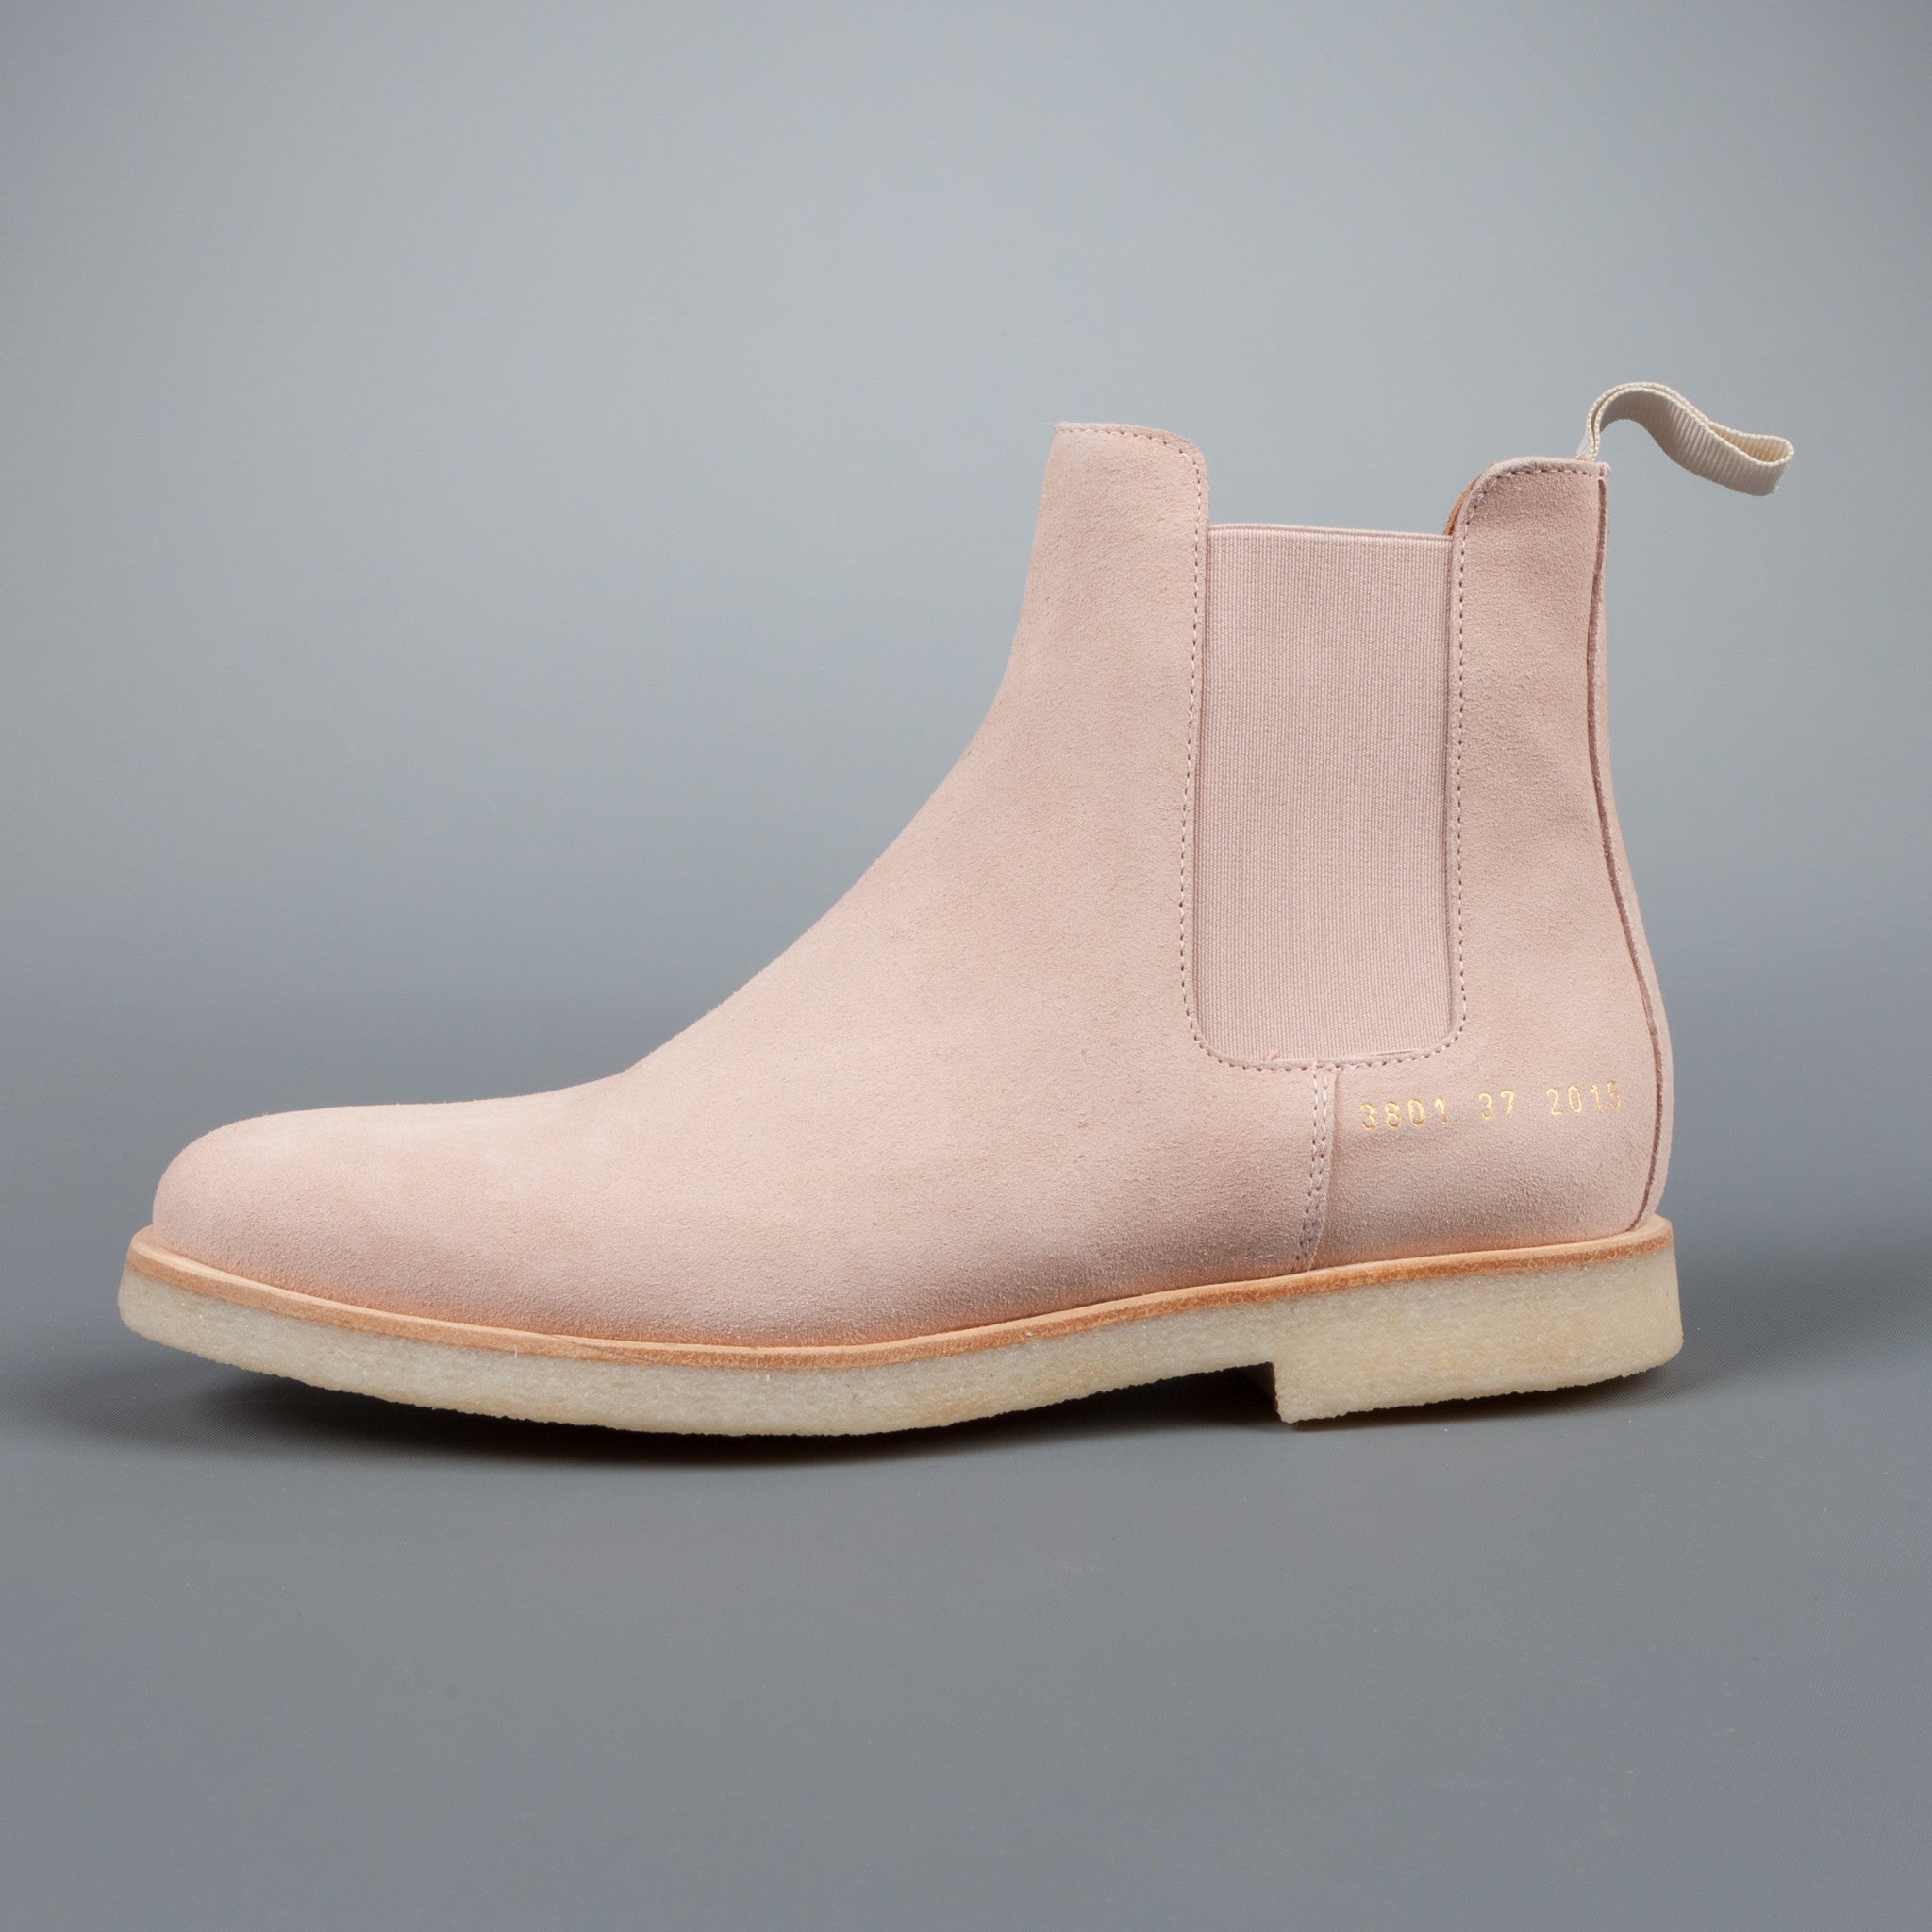 kor mini effekt Common Projects Woman by Common Projects Chelsea boot in Blush Suede –  Frans Boone Store